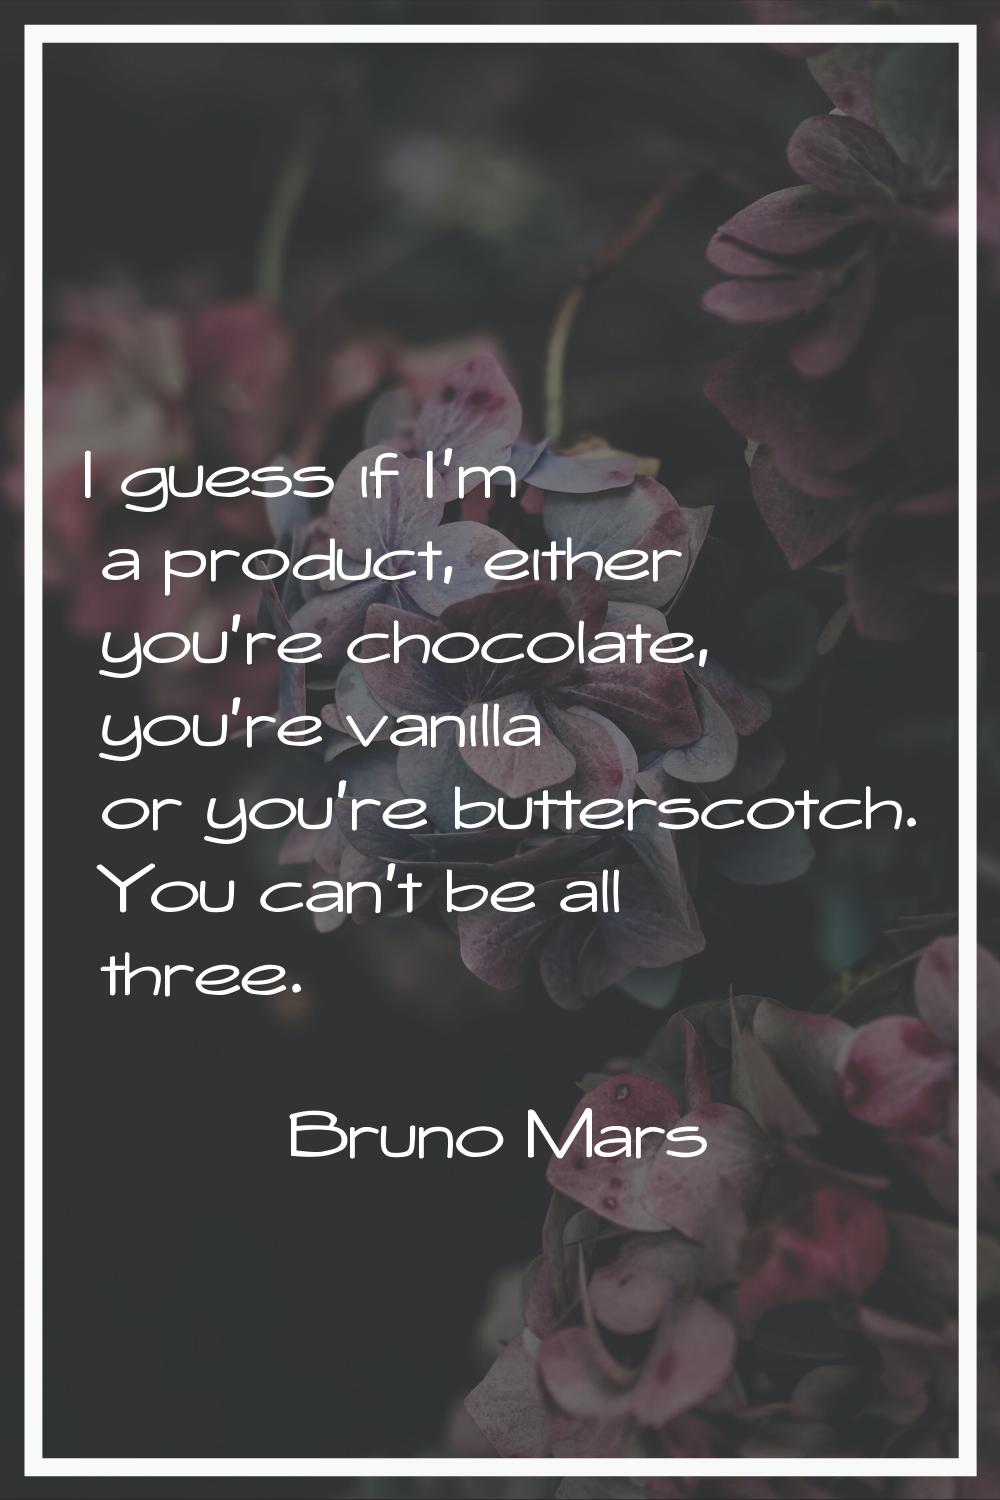 I guess if I'm a product, either you're chocolate, you're vanilla or you're butterscotch. You can't